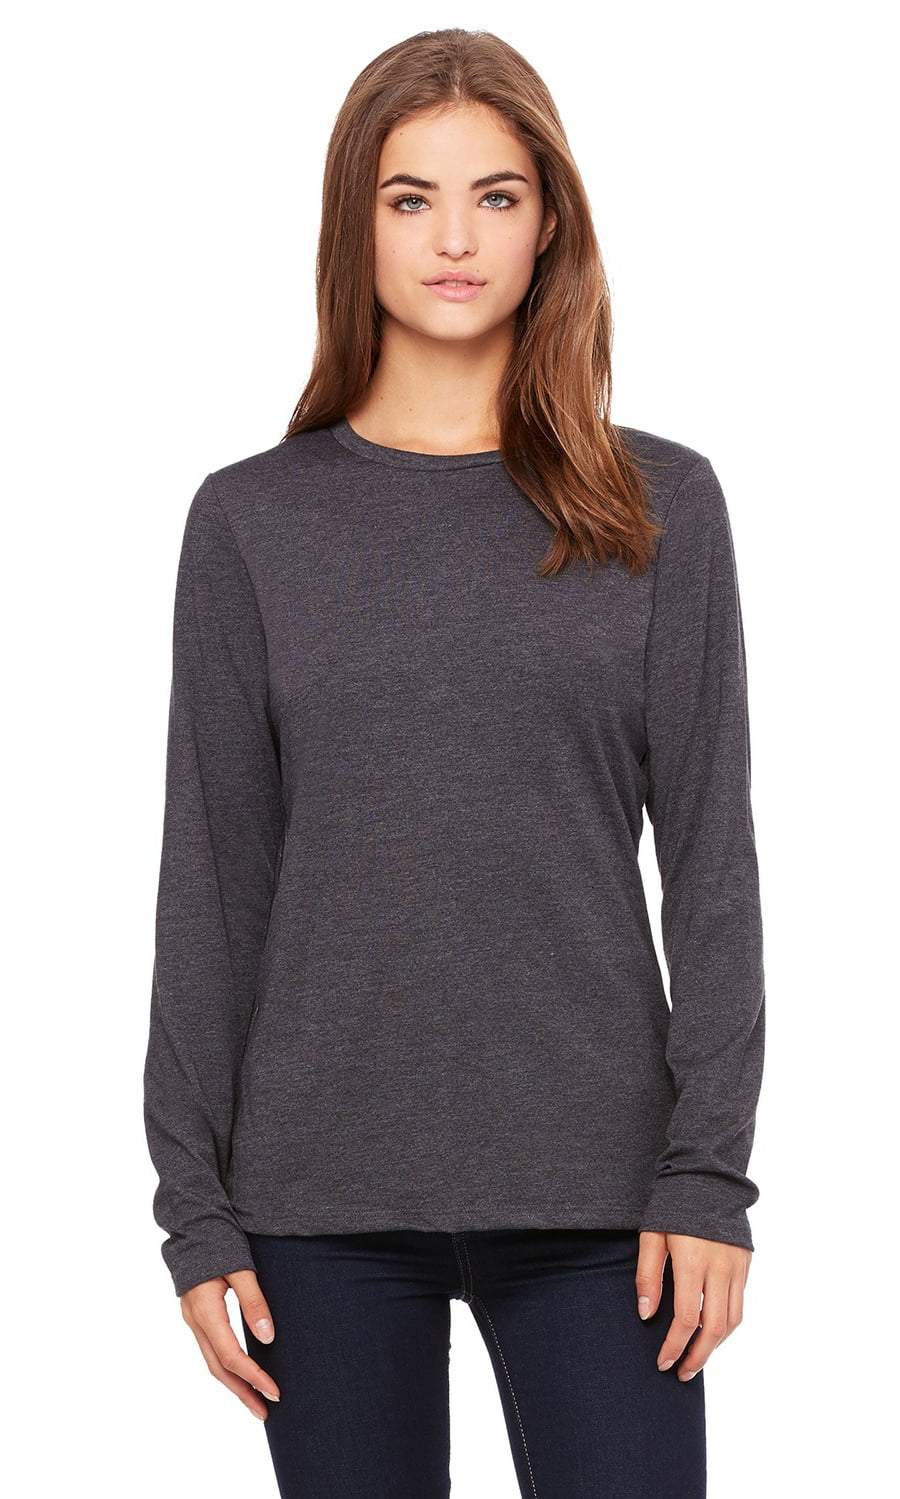 BELLA+CANVAS - The Bella + Canvas Ladies Relaxed Jersey Long Sleeve T ...